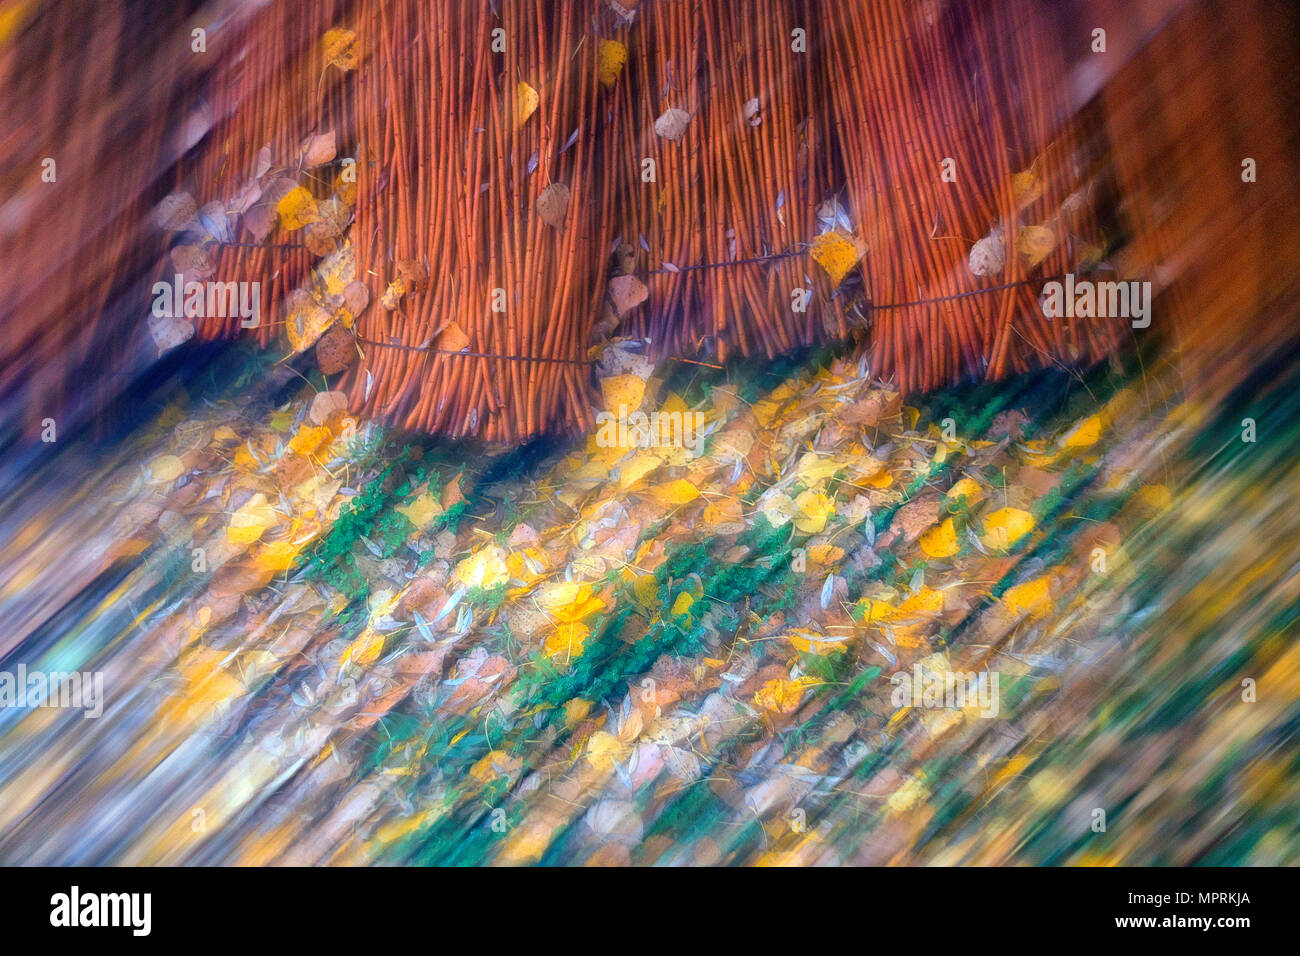 Spain, Wicker cultivation in Canamares in autumn, blurred Stock Photo